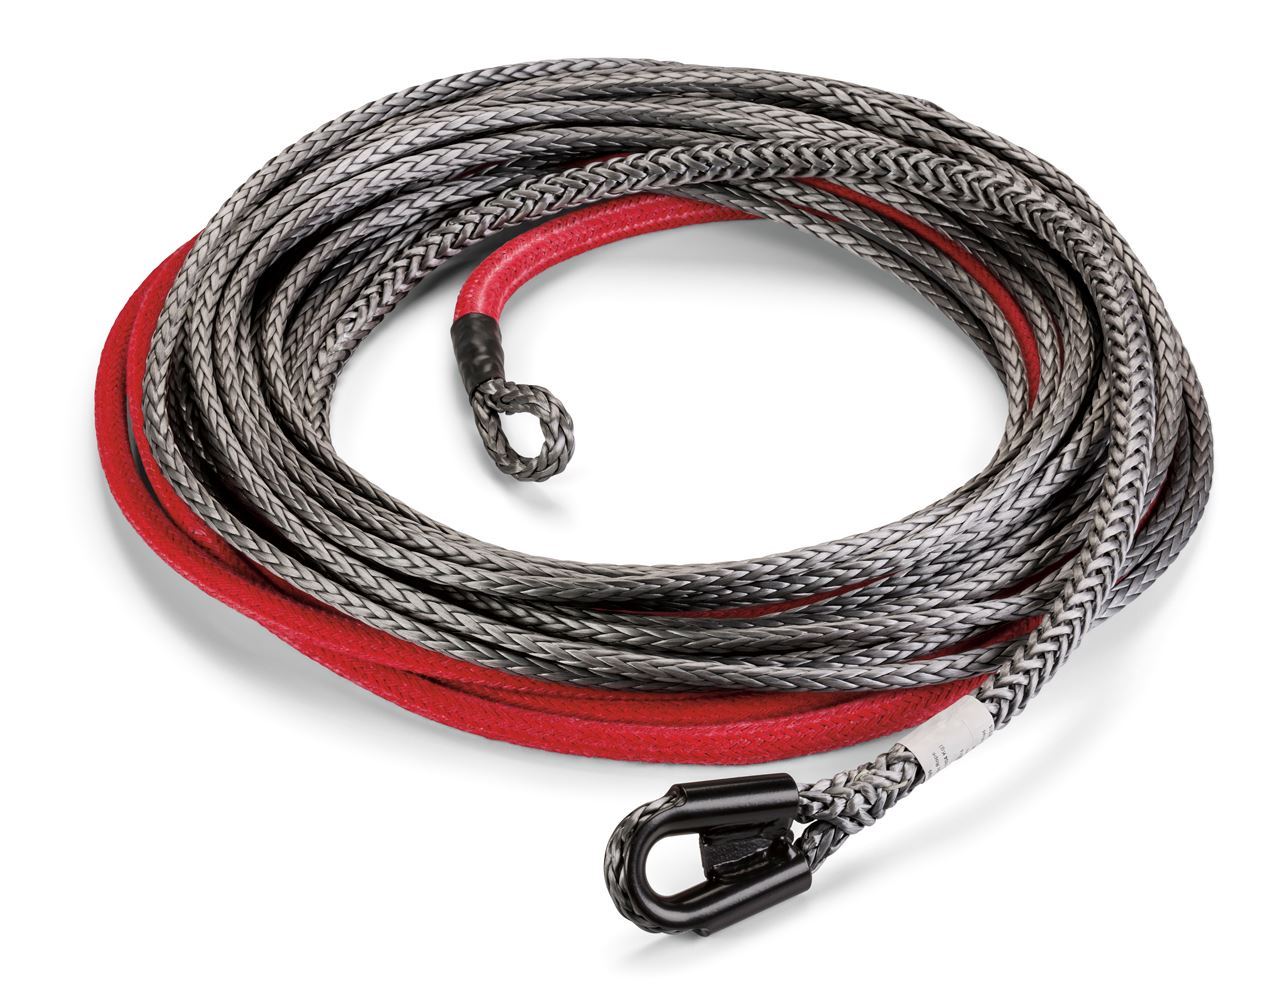 Warn 3/8 in. (9.5mm) X 80 ft. (24.4m) Spydura Pro Cable